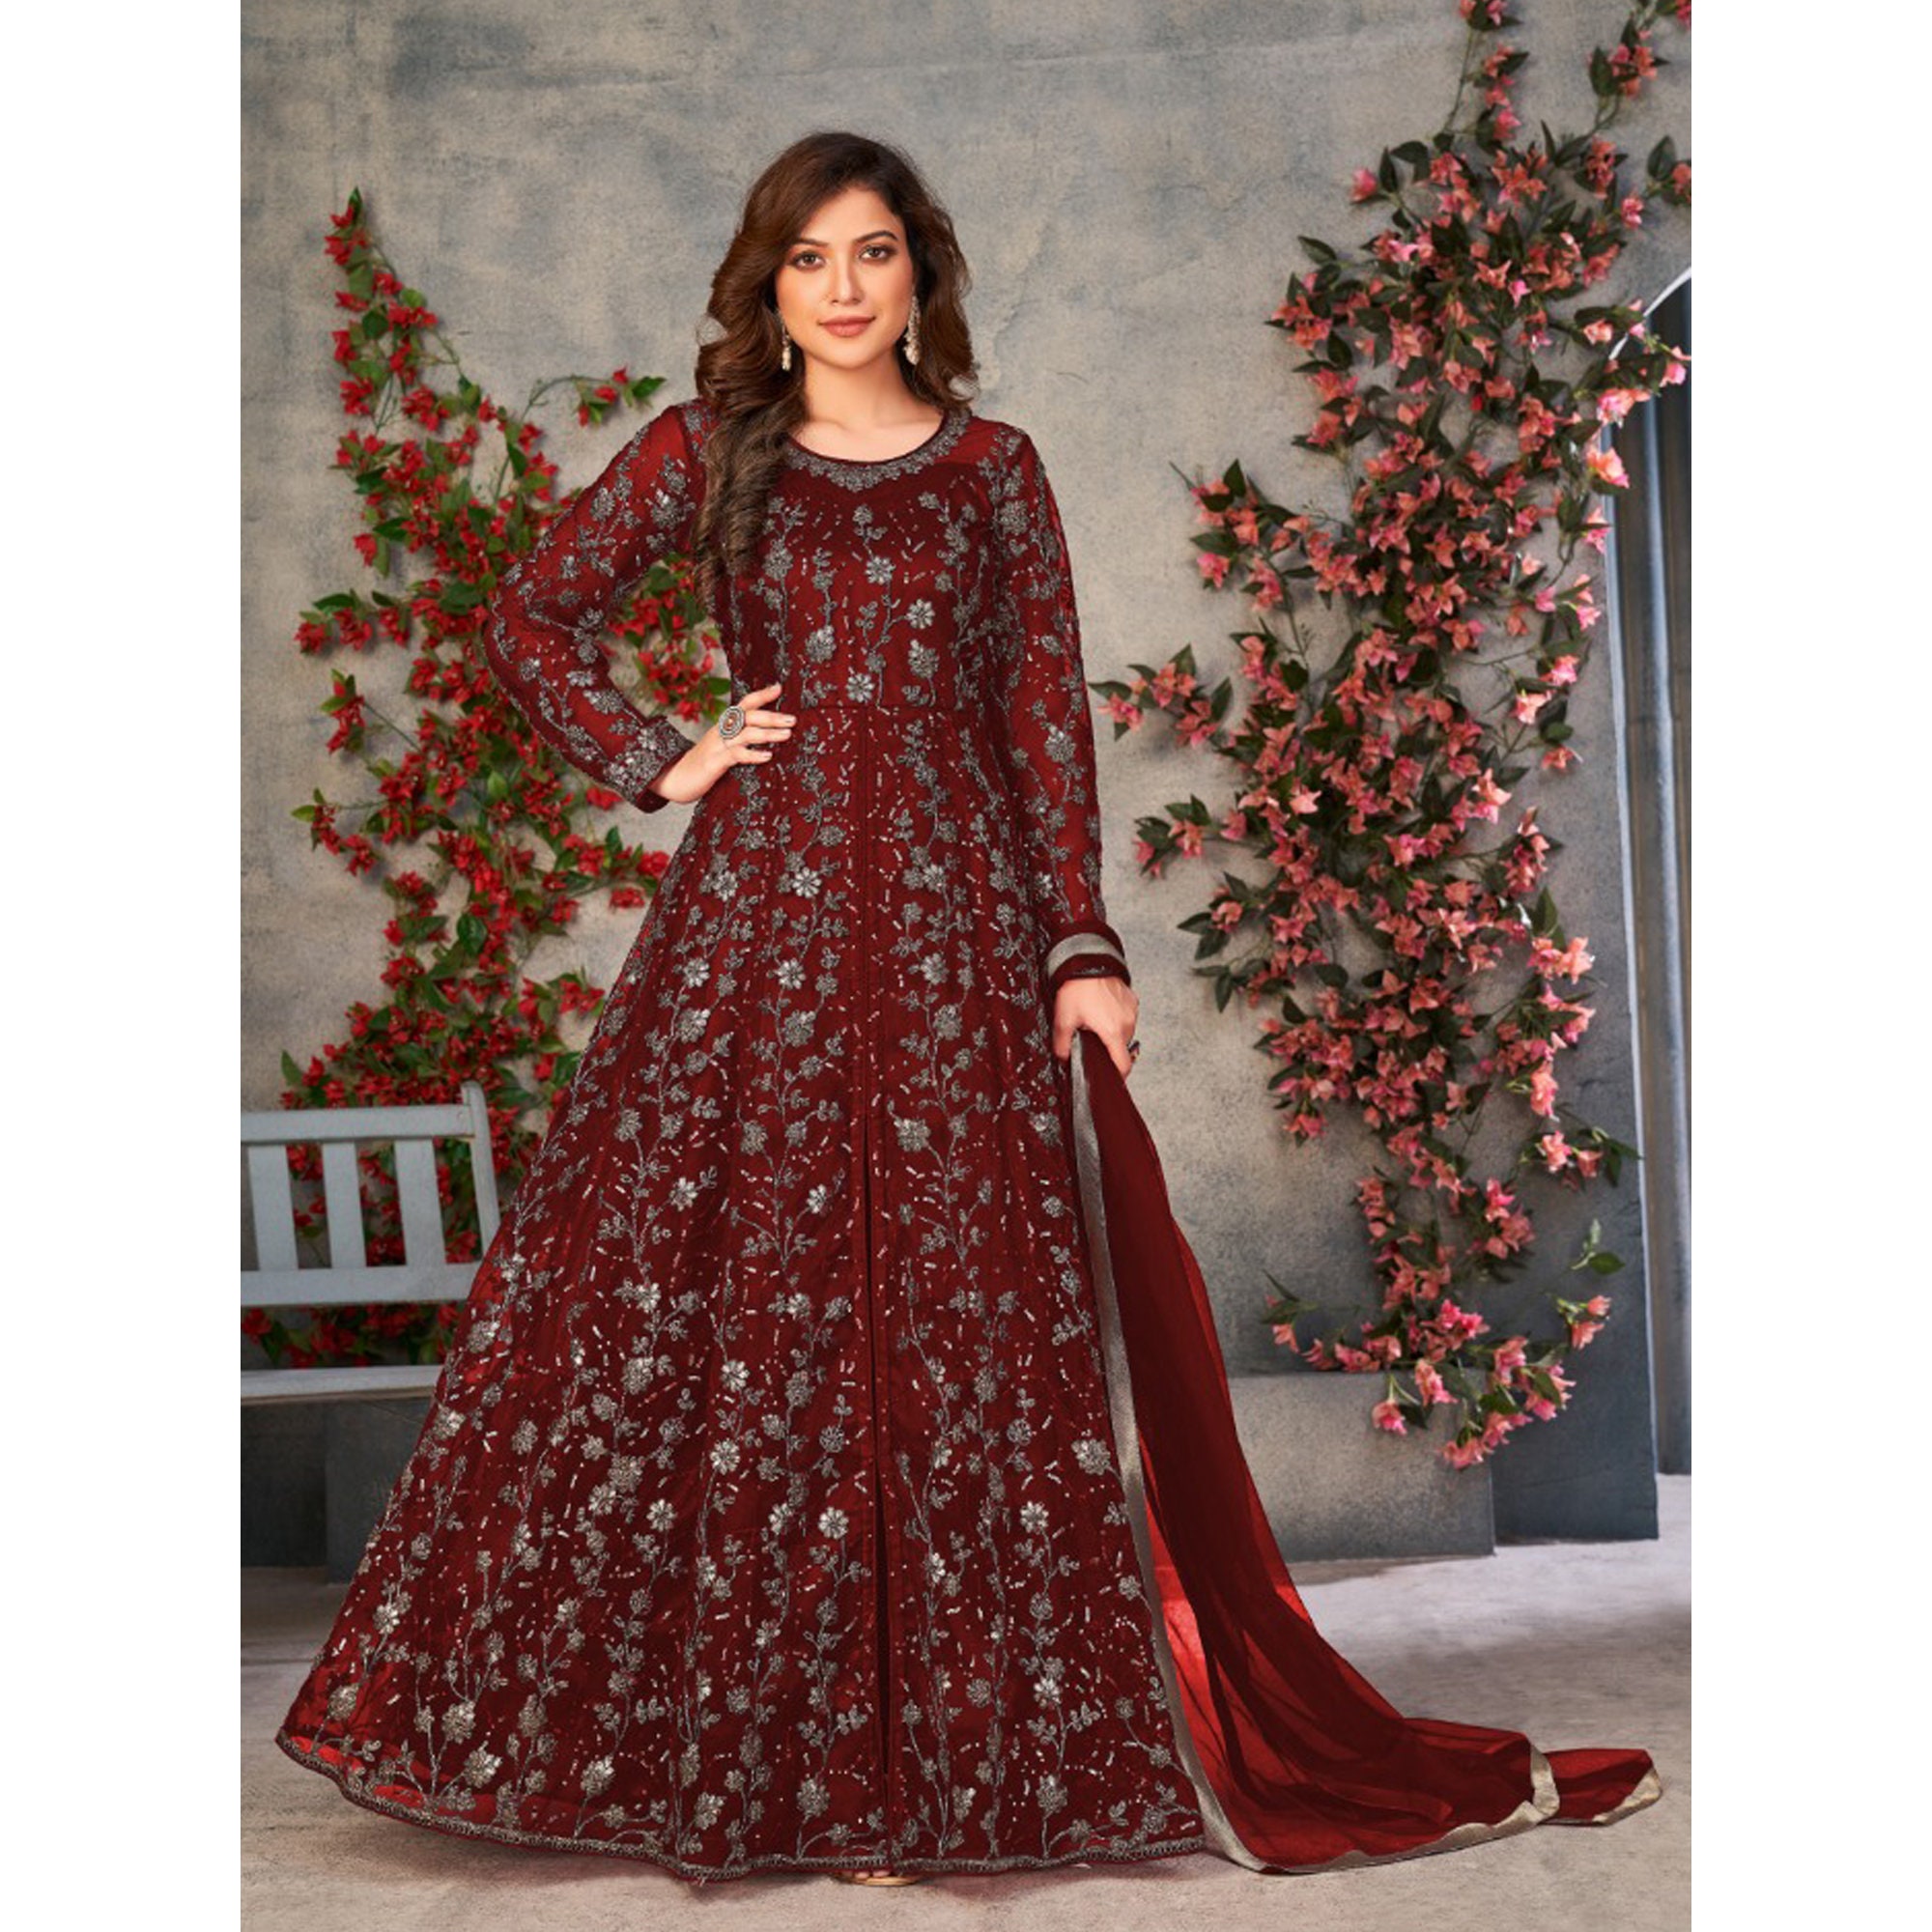 Stylish Anarkali Long Gown Suit at Rs.2500/Piece in allahabad offer by Maya  Bhai Garments